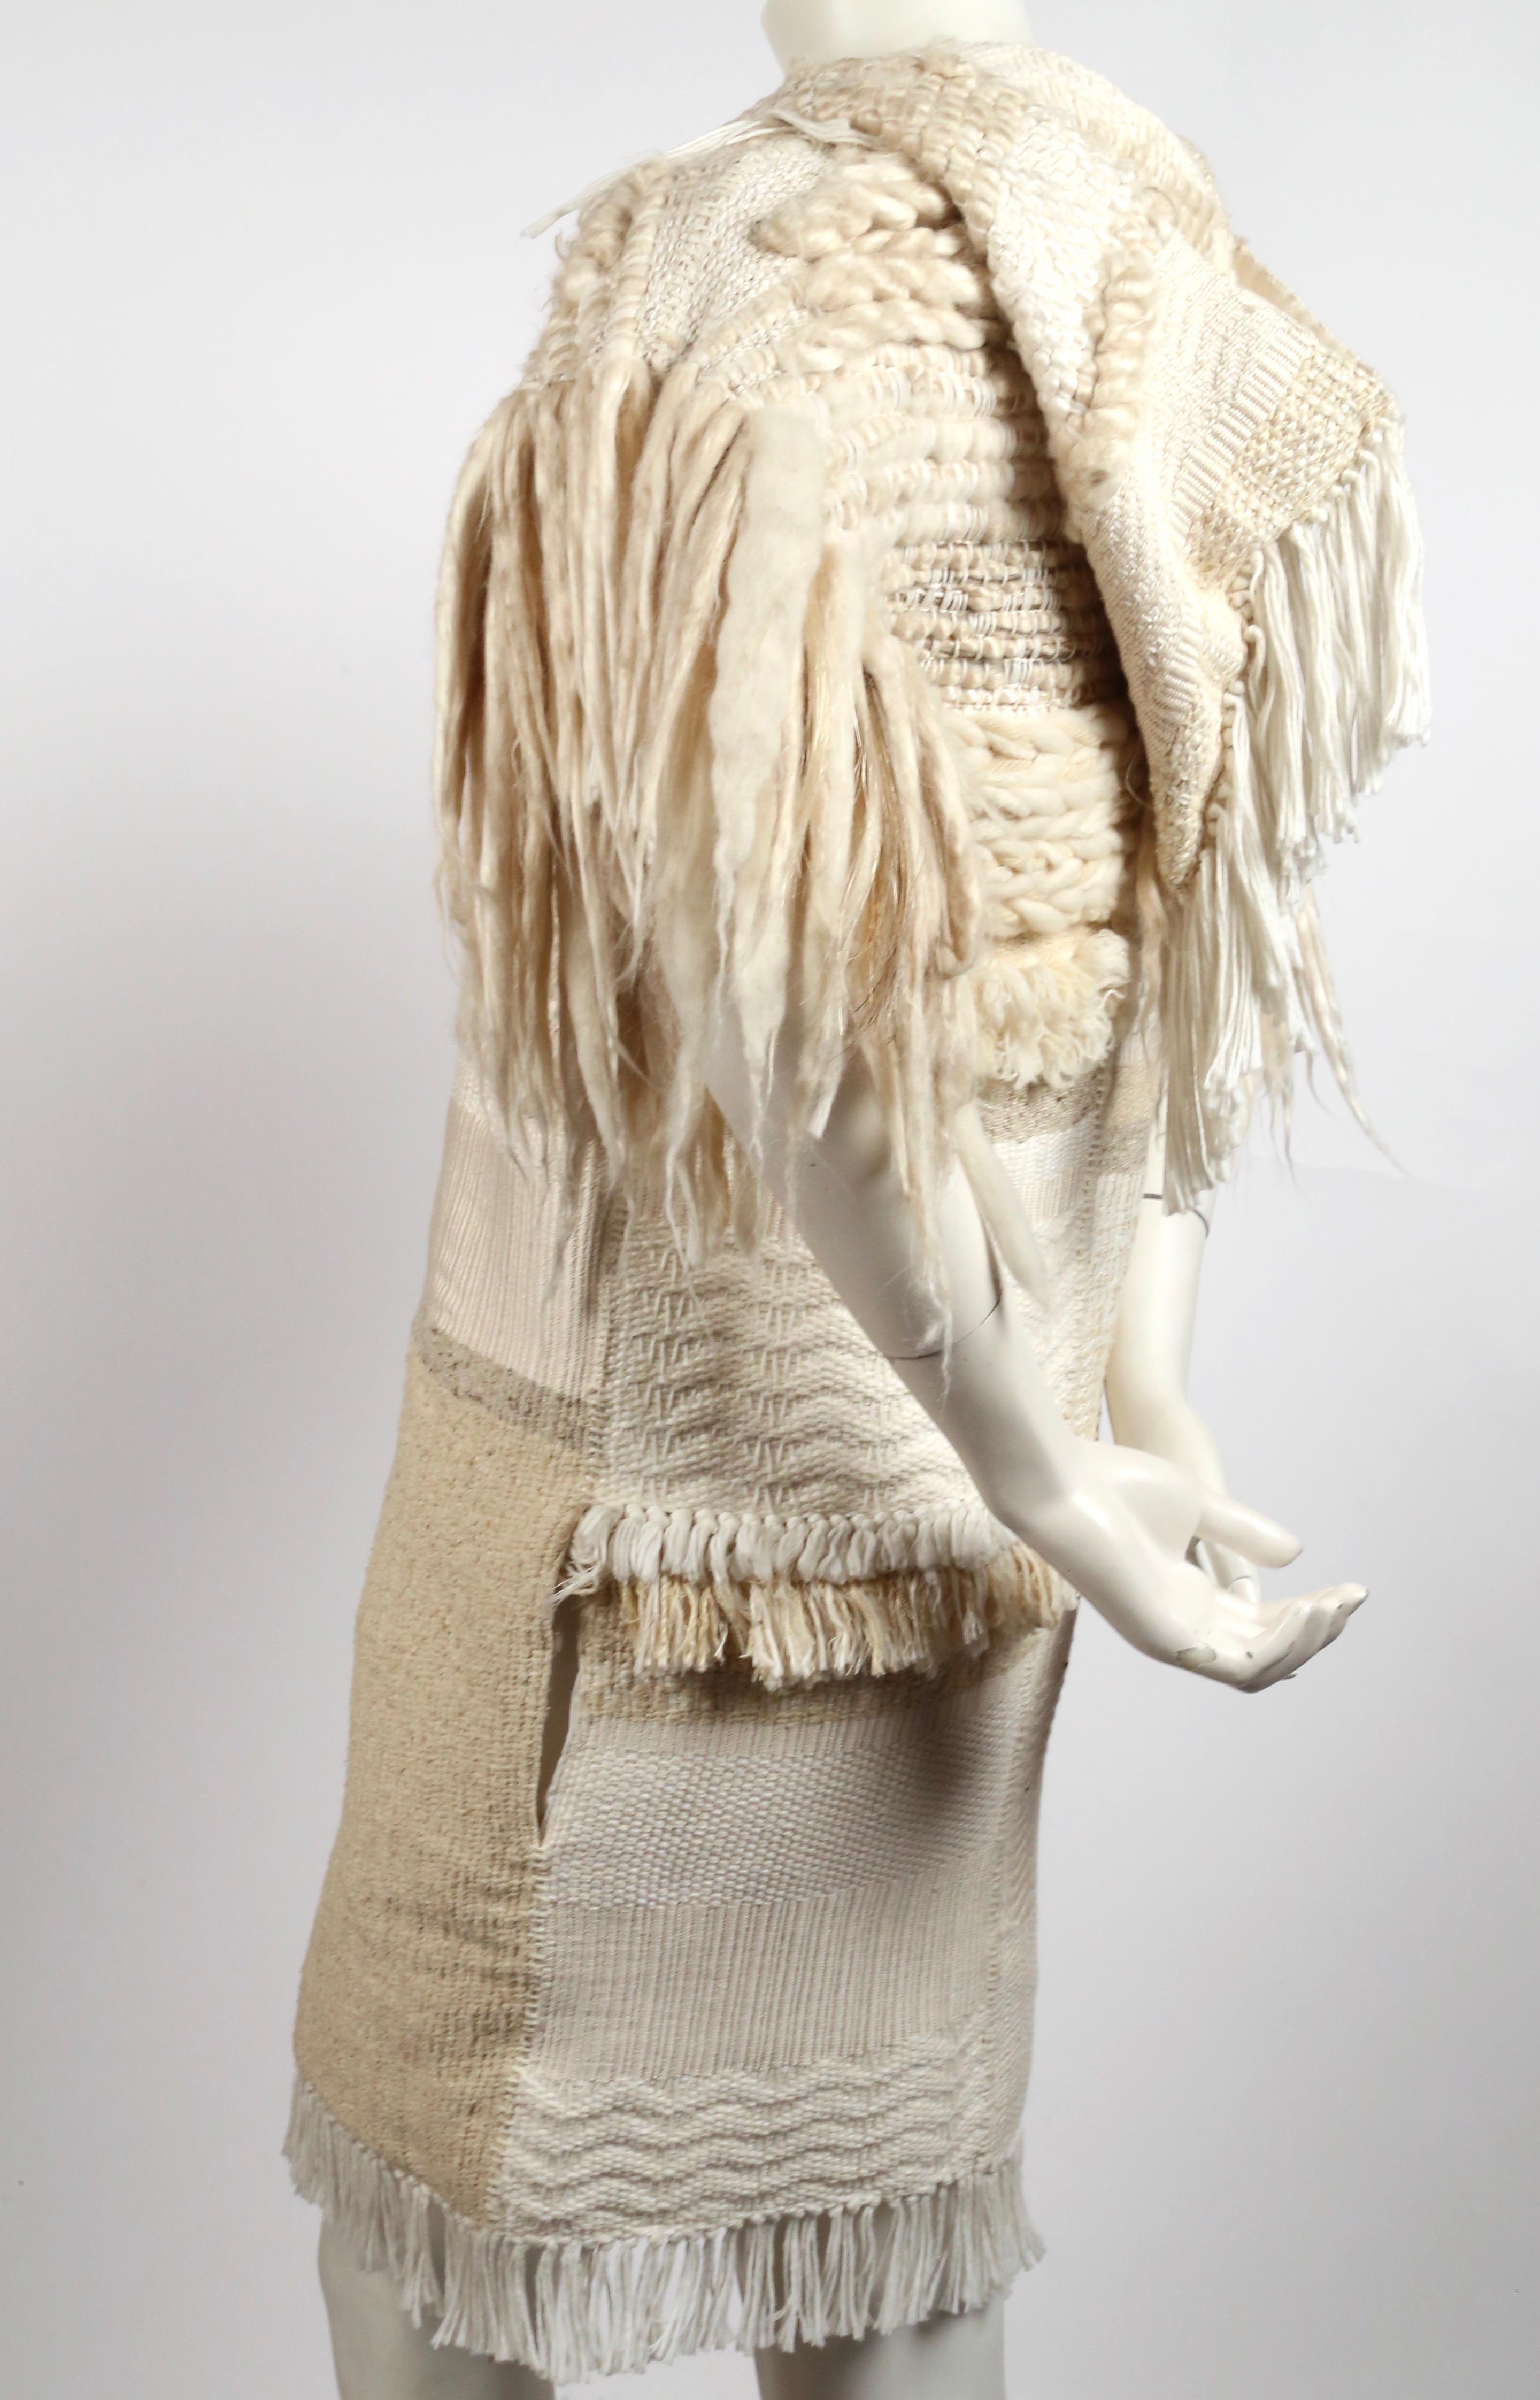 Beautiful, handwoven textile coat in tones of white and cream designed by Phoebe Philo for Celine exactly as seen on the spring 2011 runway. Very rare piece. French size 38. Approximate measurements: bust 38